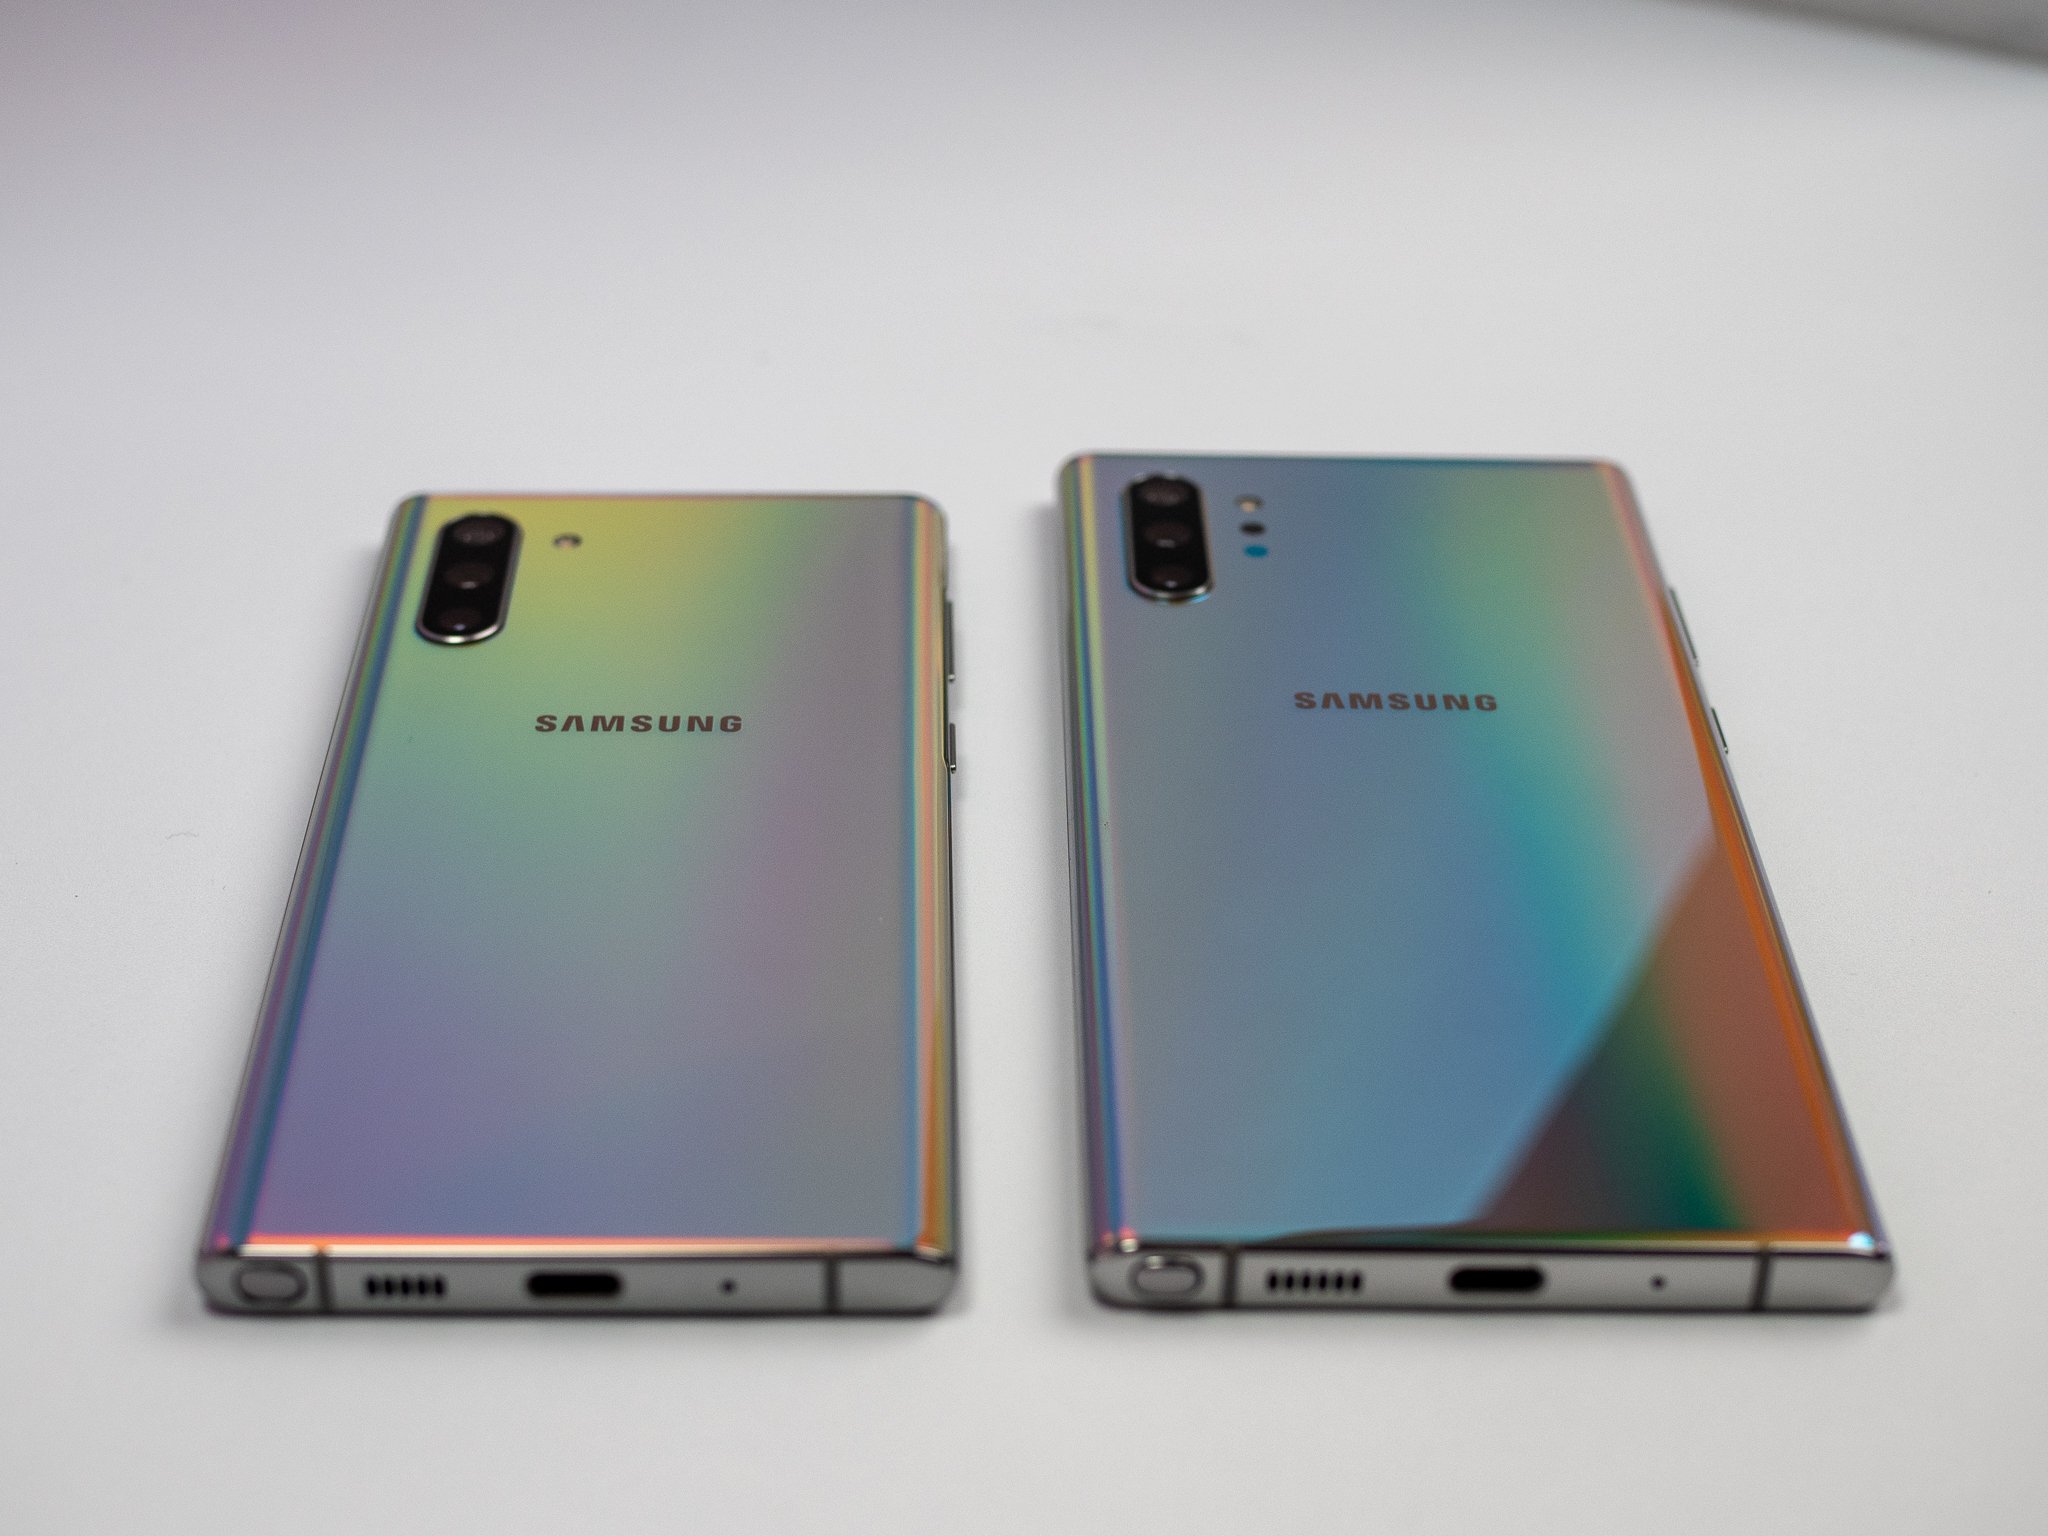 Samsung Galaxy Note 10 And Note 10 Specs More Ram Fewer Jacks